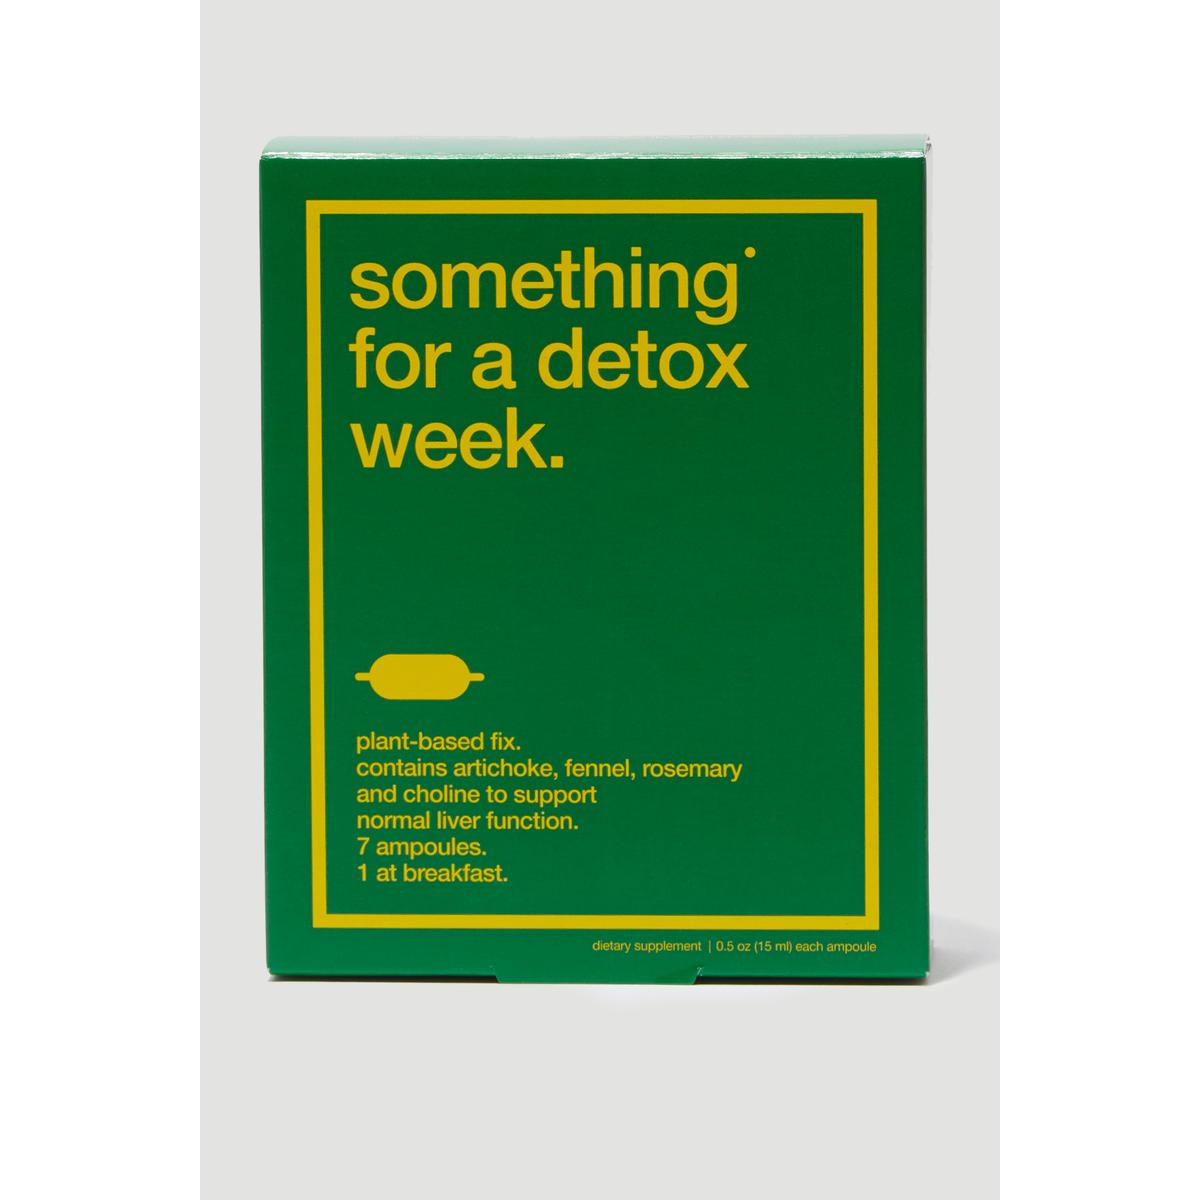 Love stories Something for a detox week